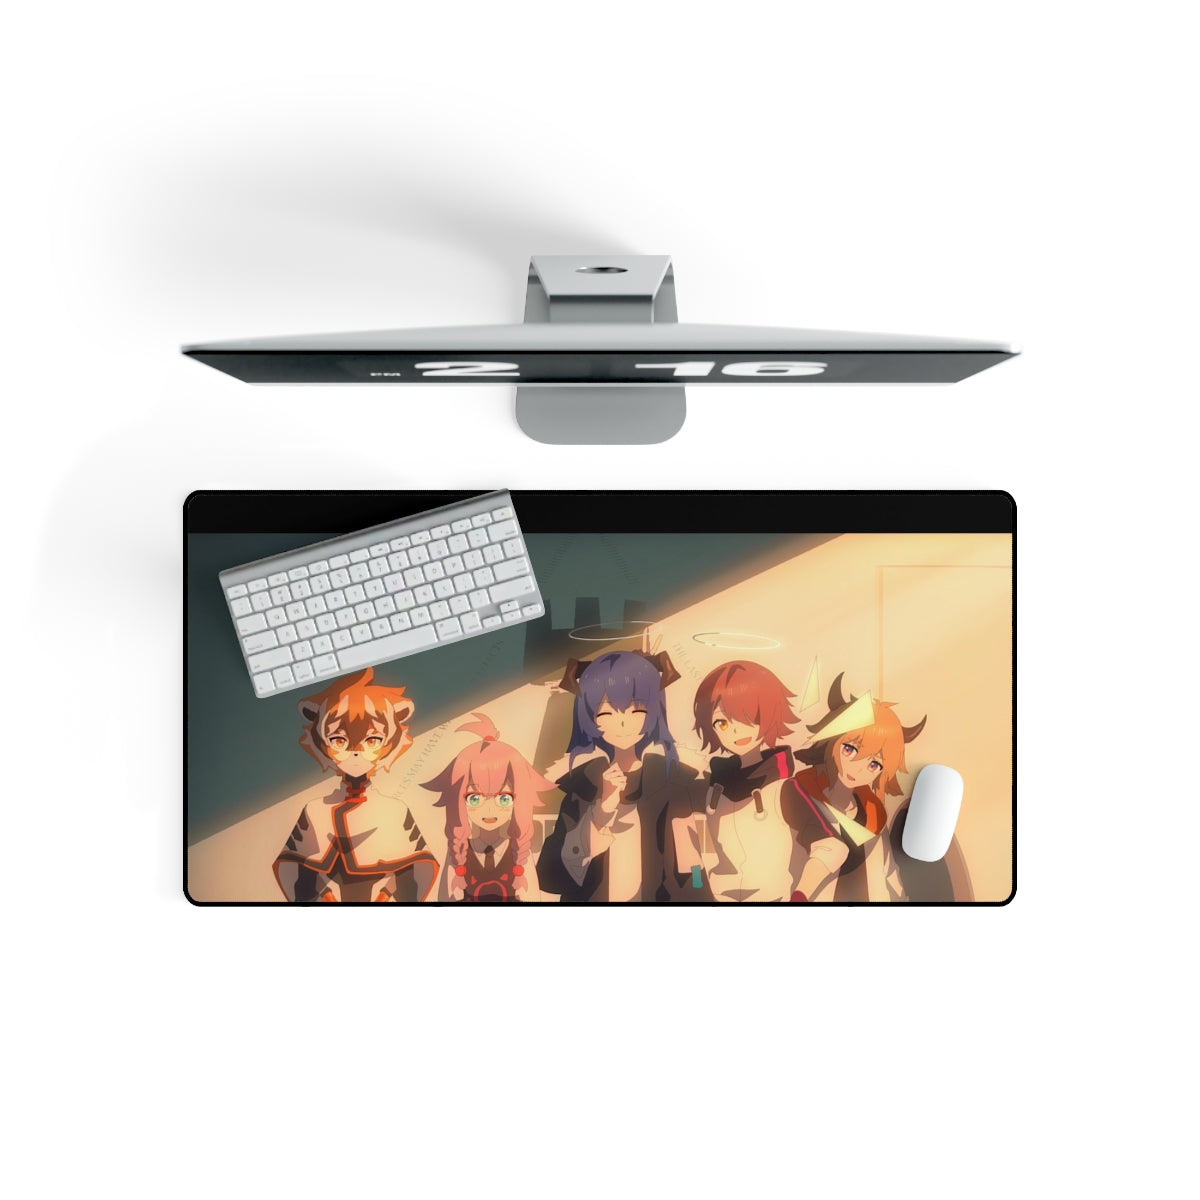 Arknights Mouse Pad (Desk Mat)